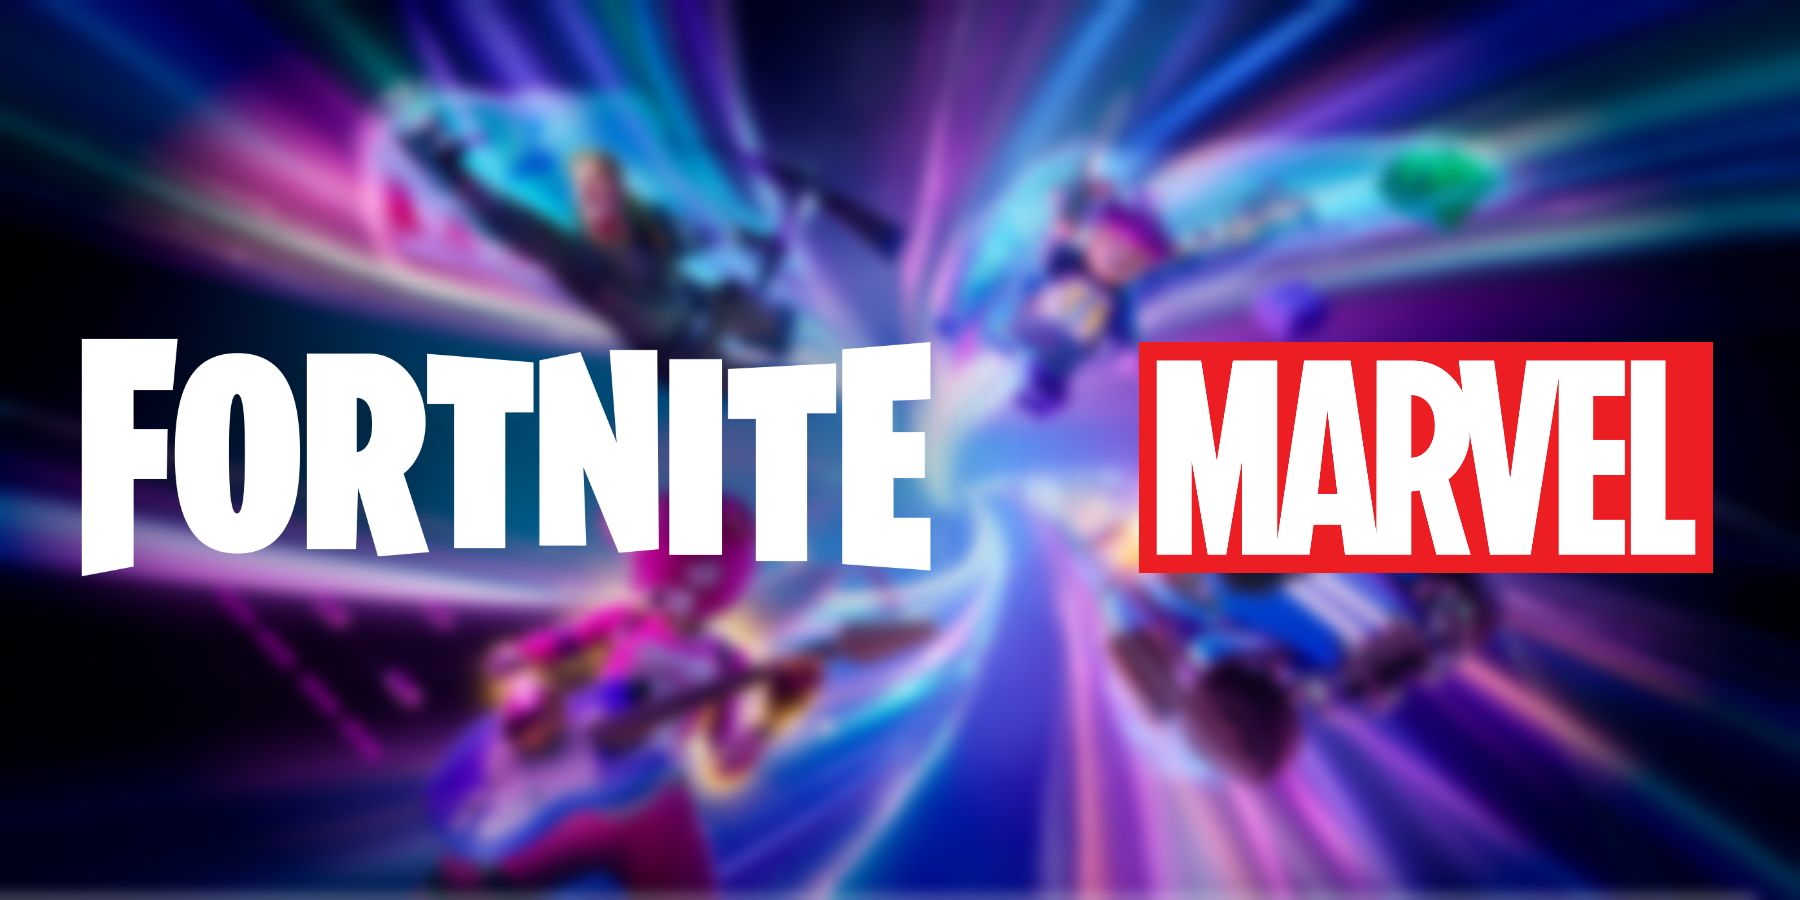 A blurred key visual for Fortnite, overlayed with the logos for Fortnite and Marvel.